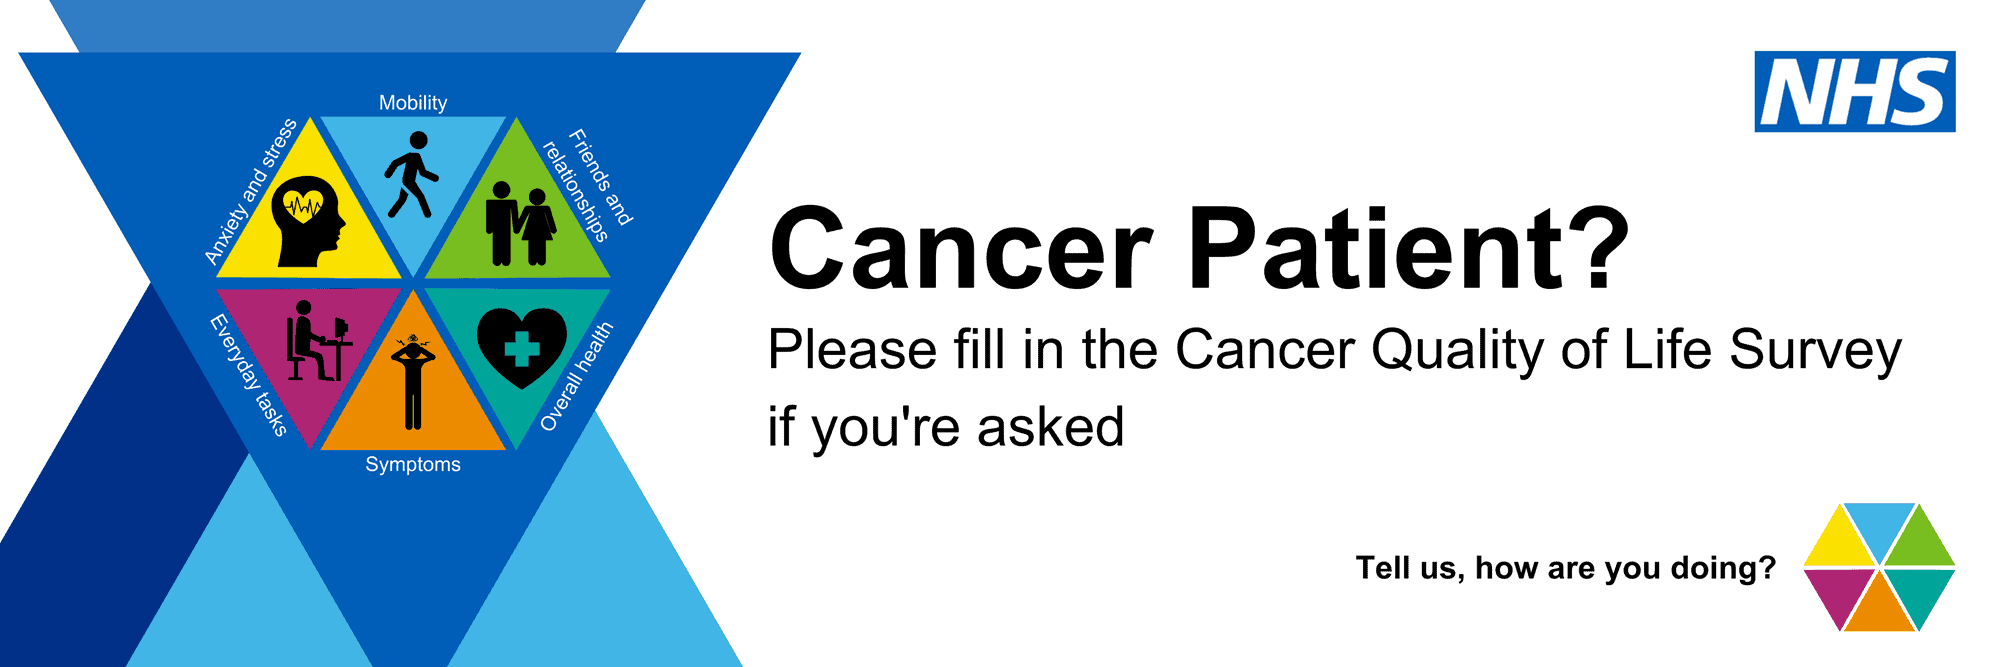 image with wording about the cancer quality of life survey